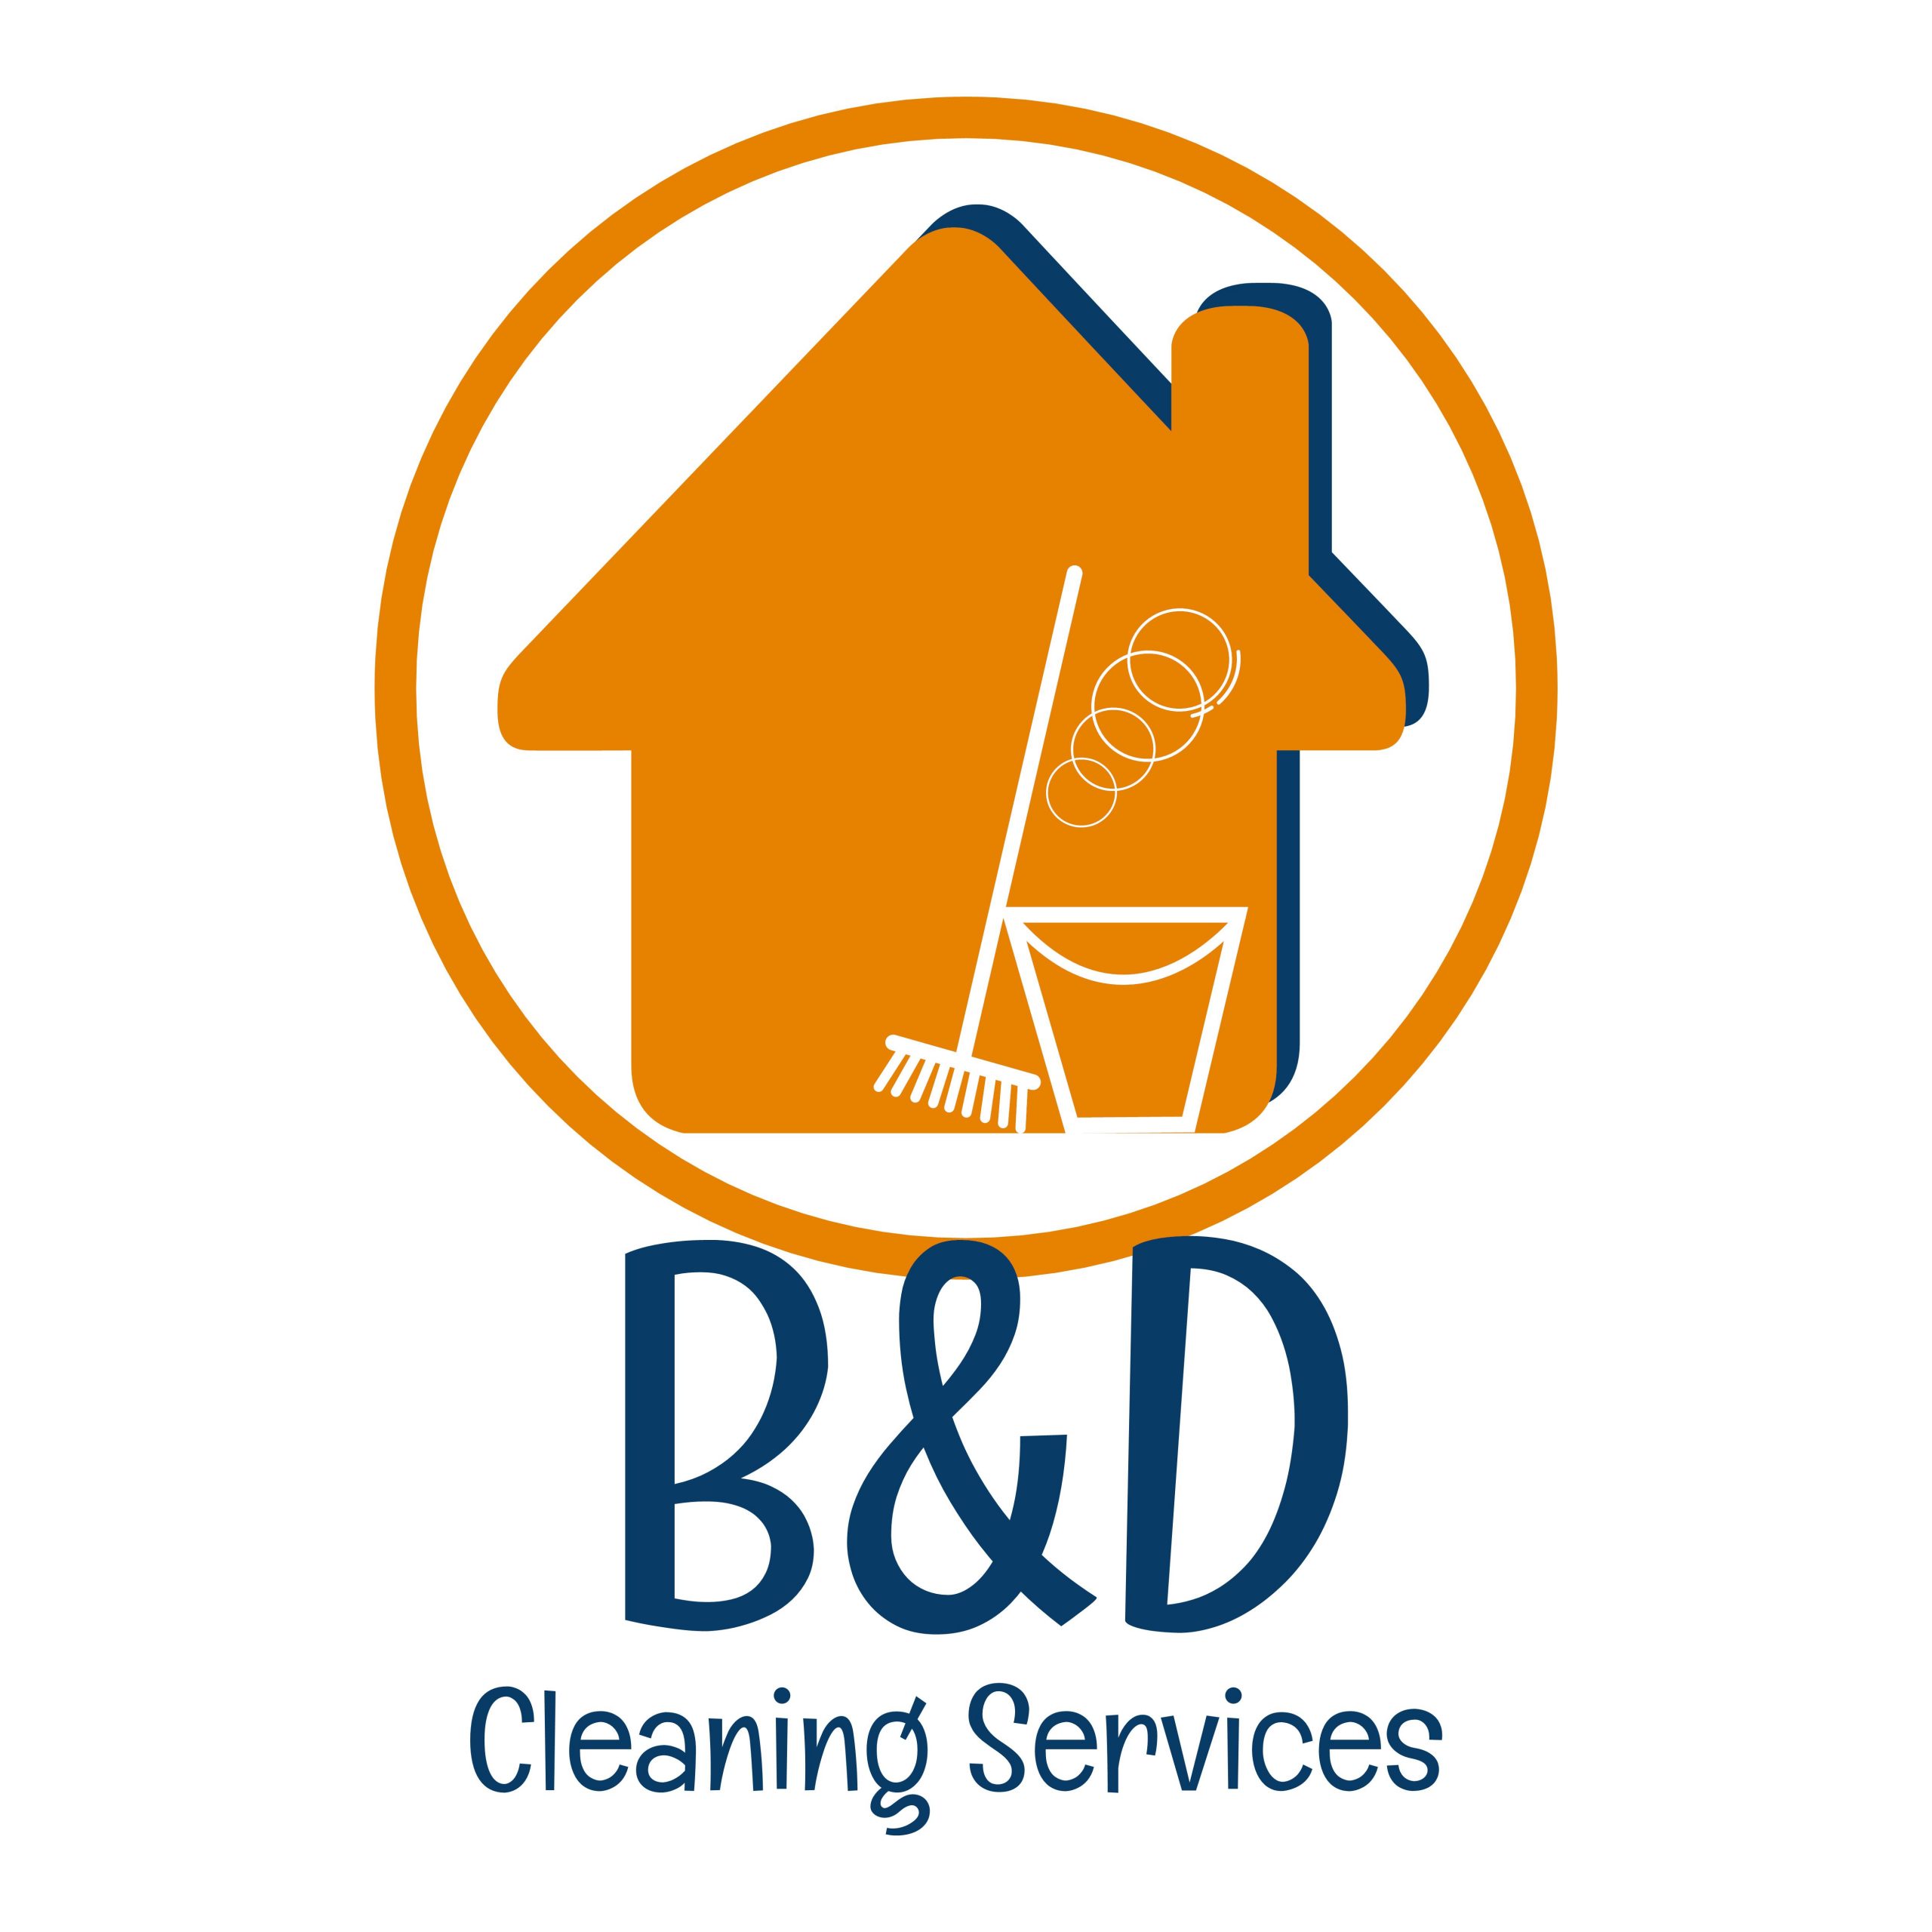 B&D Cleaning Services, LLC